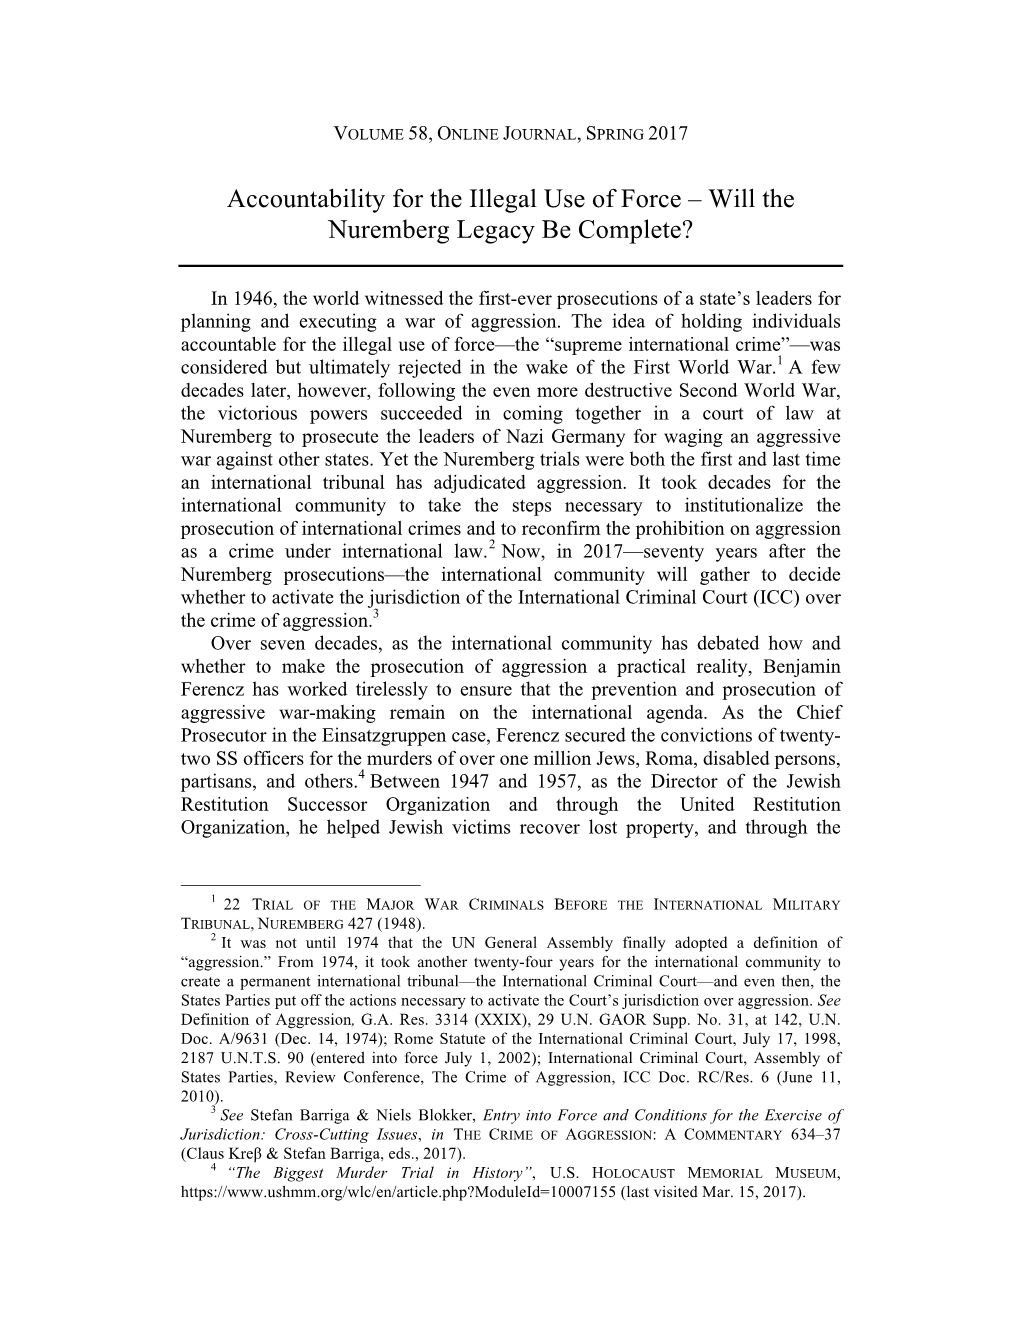 Accountability for the Illegal Use of Force – Will the Nuremberg Legacy Be Complete?